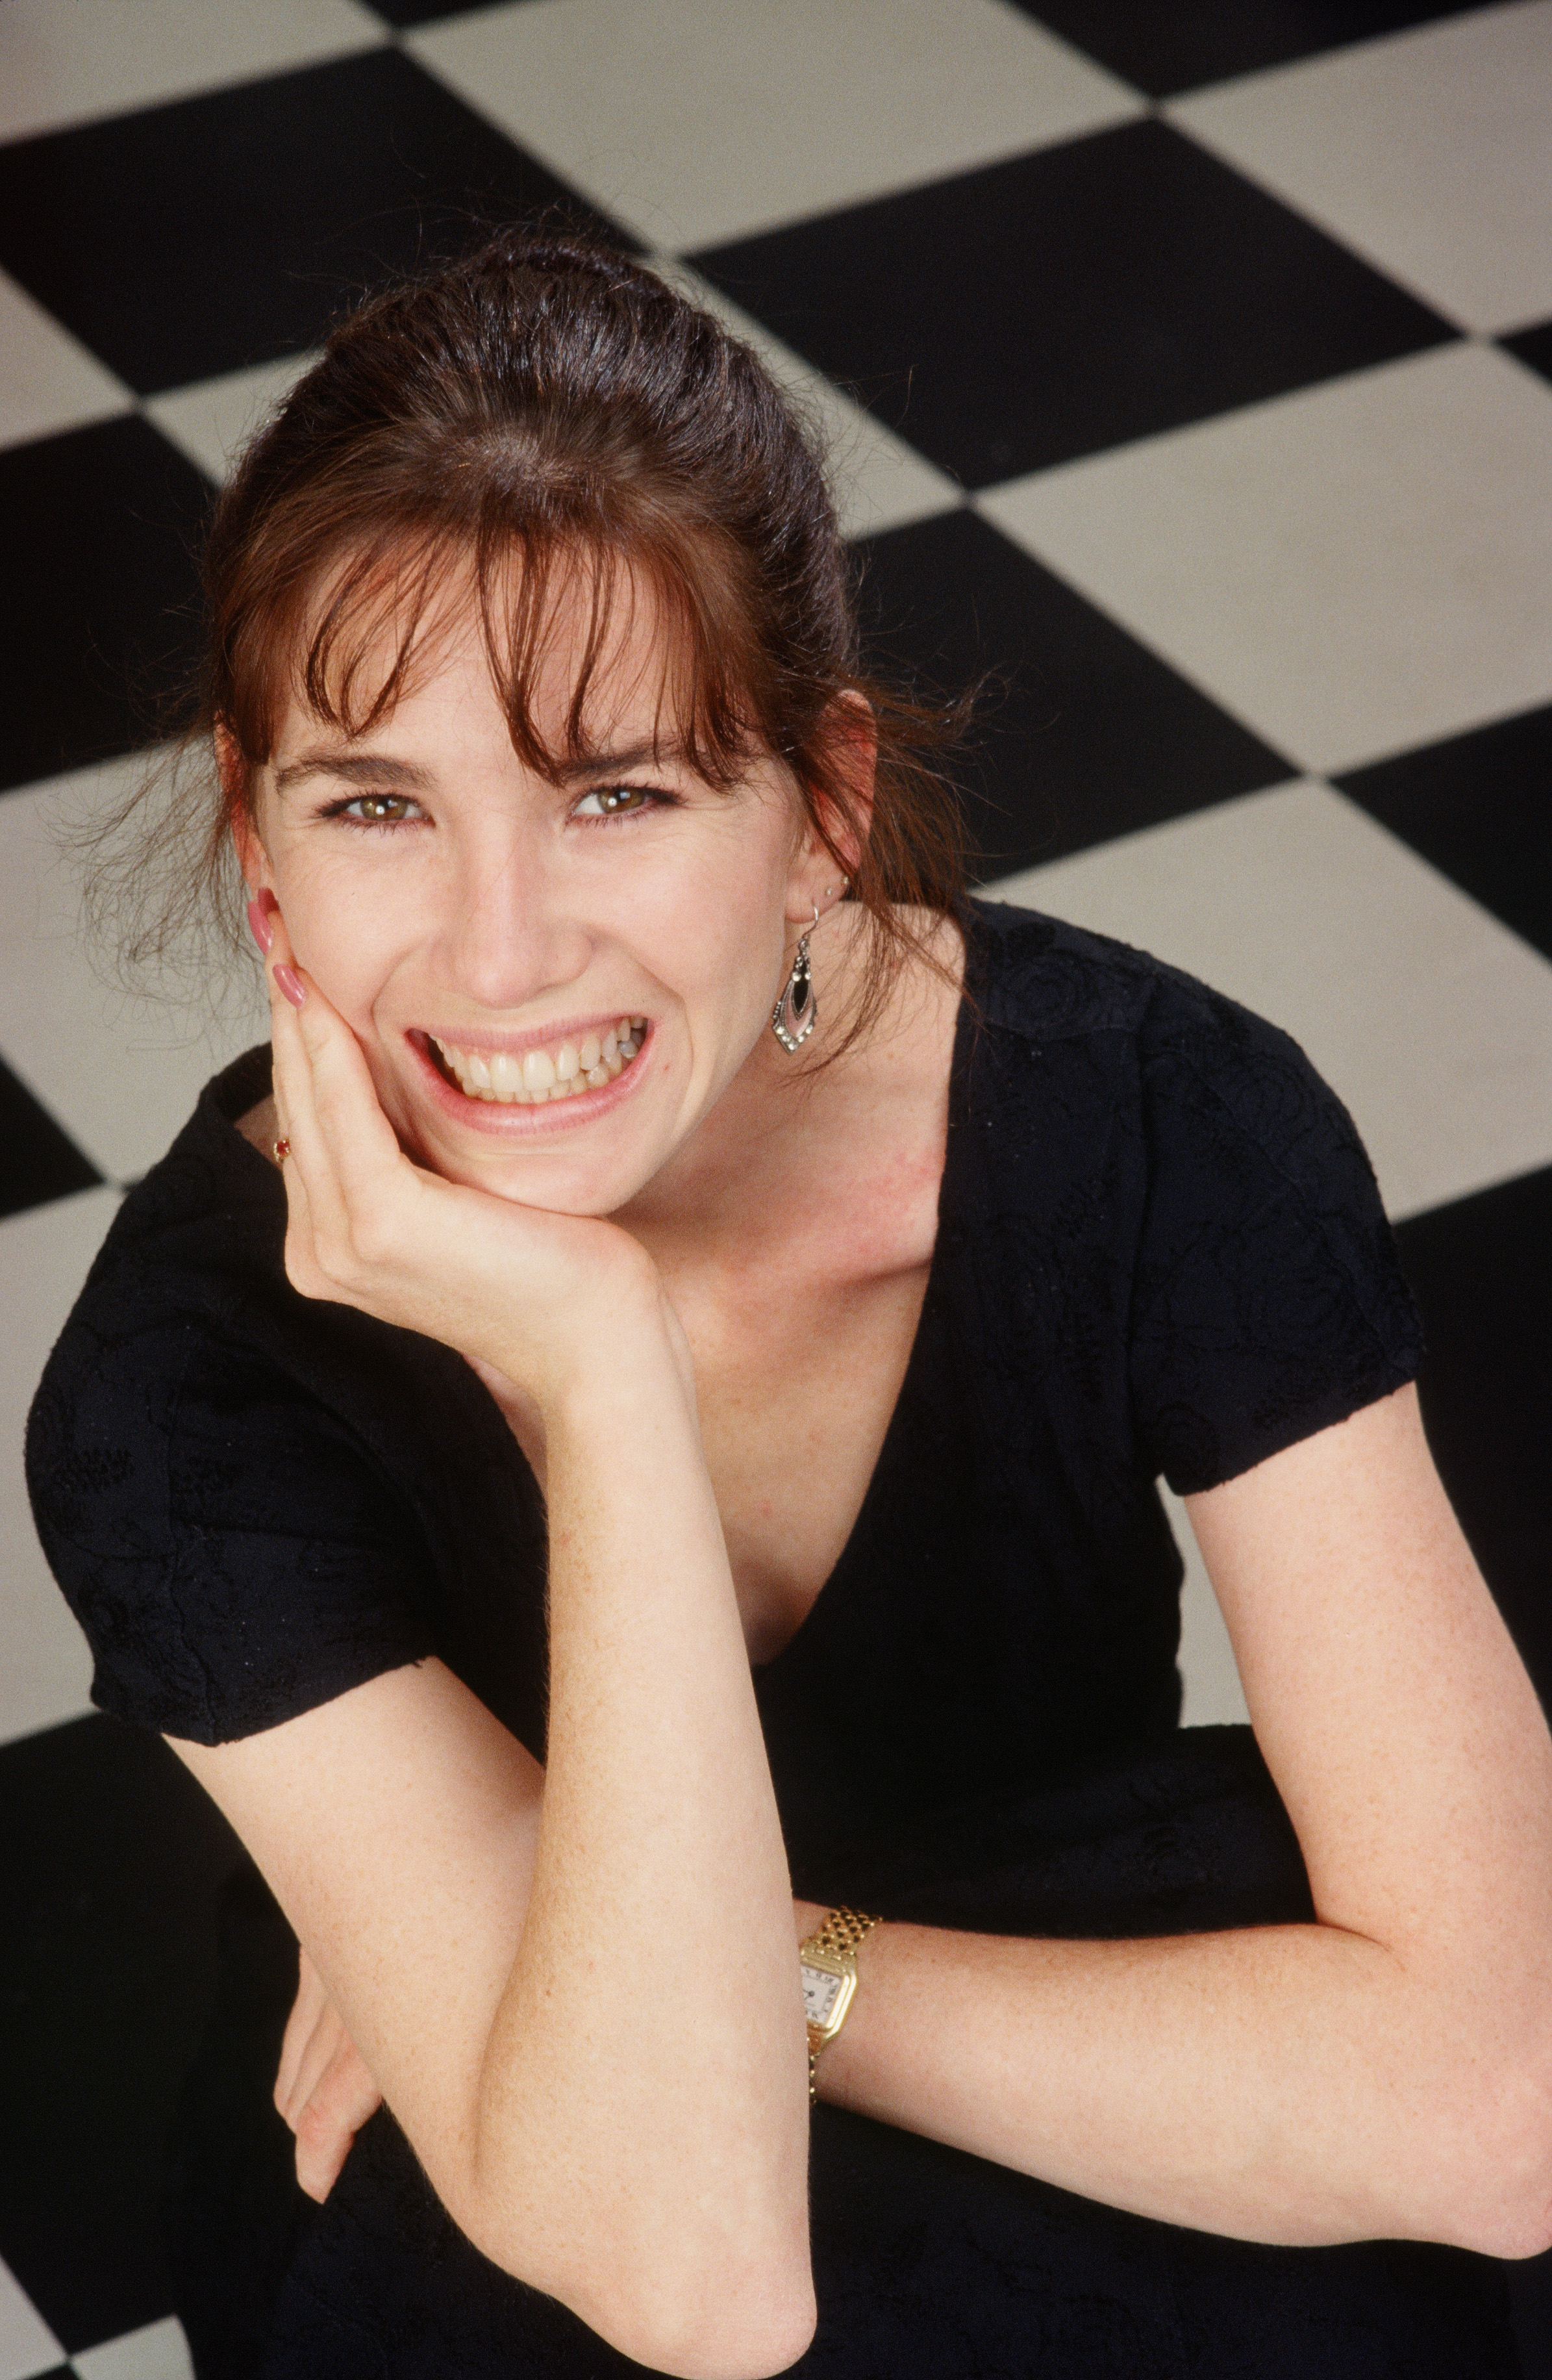 Melissa Gilbert poses during a Los Angeles, California, photo portrait session on February 13, 1990 | Source: Getty Images